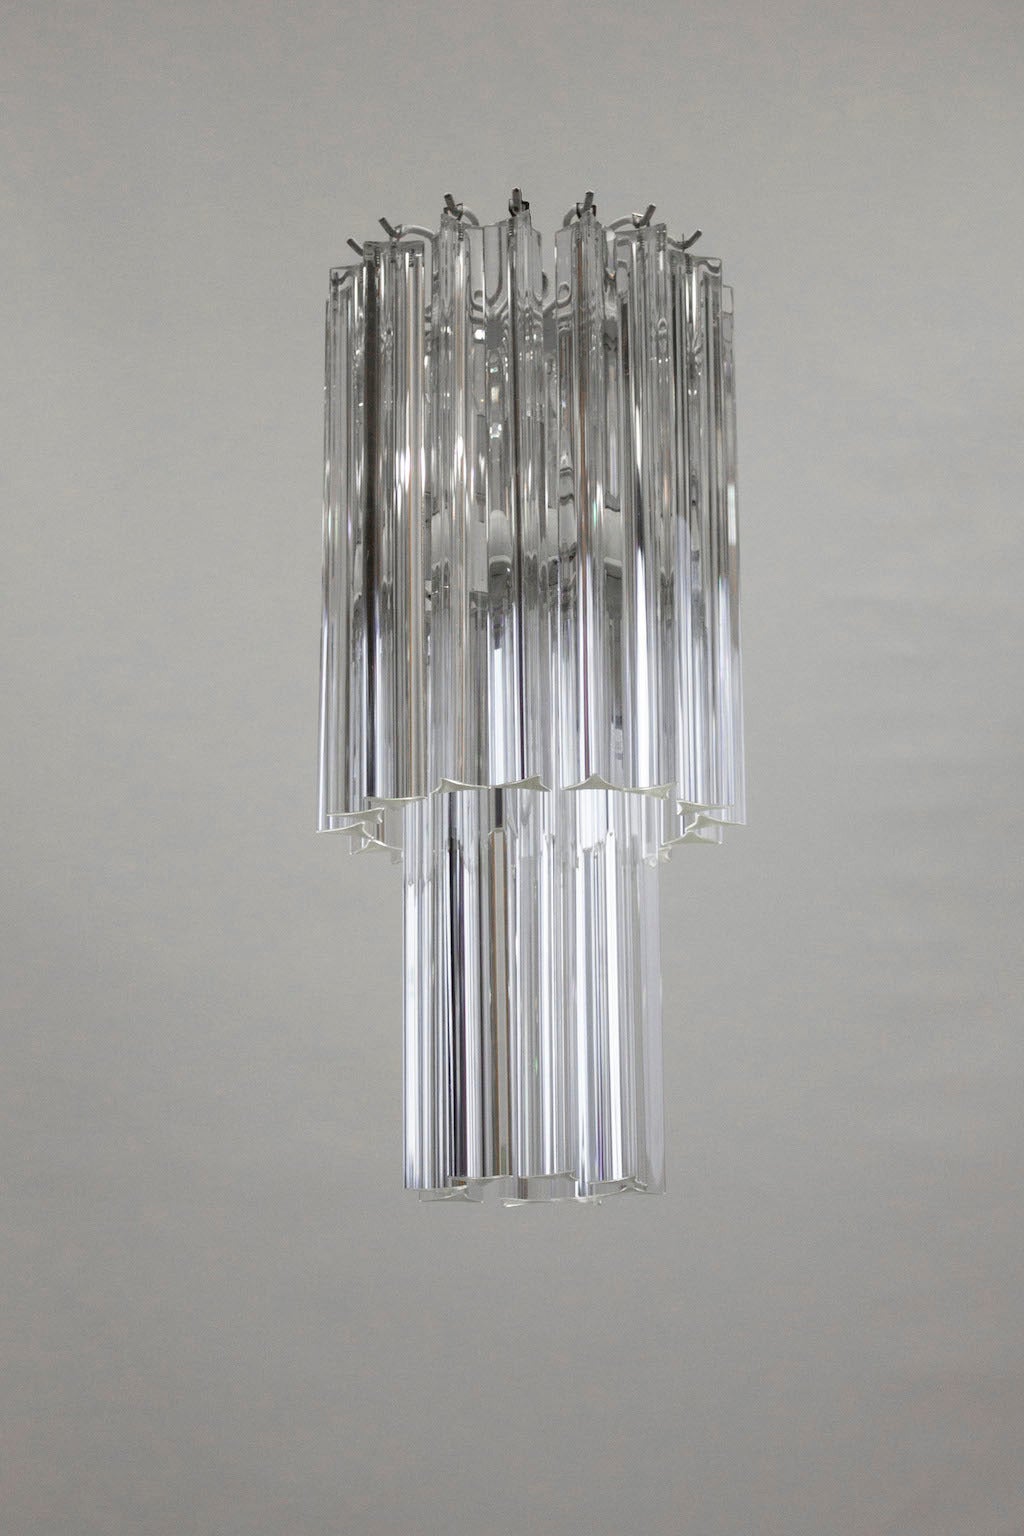 Pair of Chandeliers Suspension Blown Murano Glass Triedro 1960s Italy.
Amazing pair of Murano chandeliers in excellent original condition, as documented in the attached pictures, attributed to Camer Glass, circa 1960s.
The chandeliers are